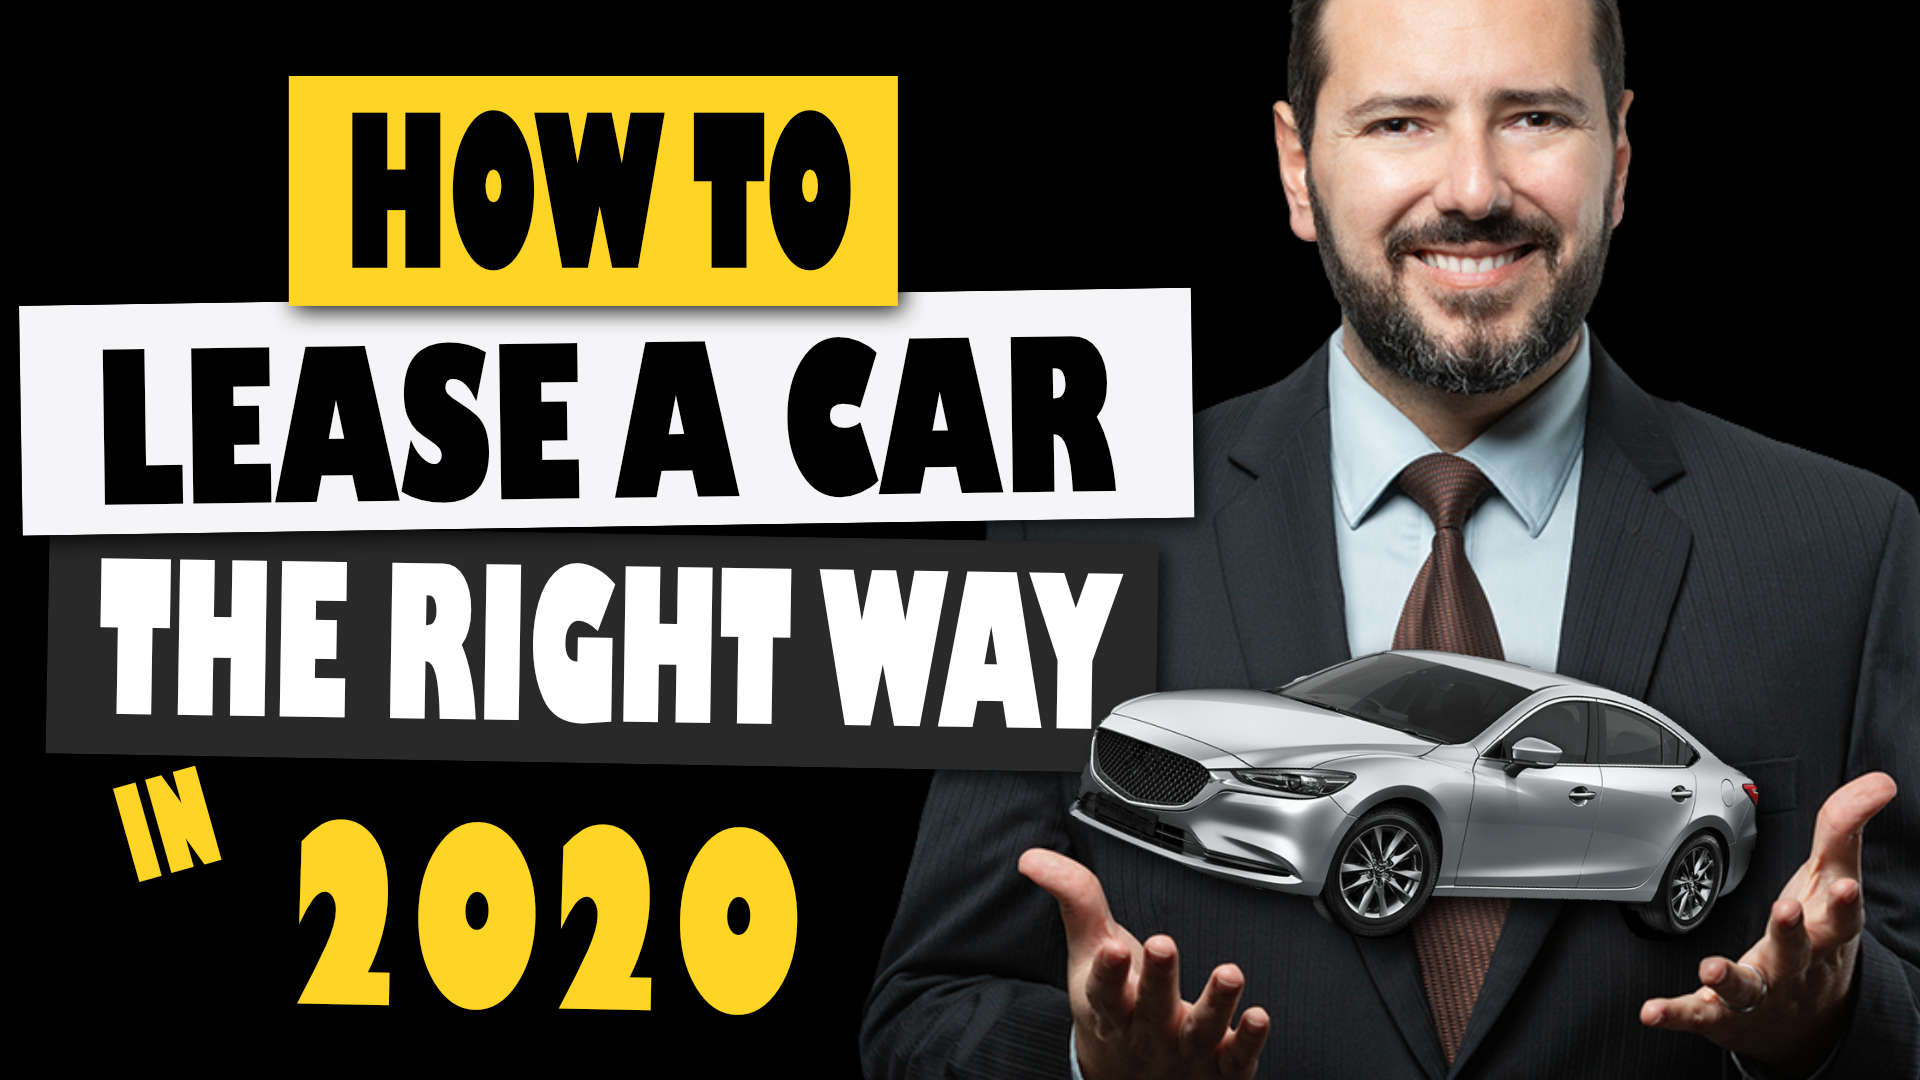 How to lease a car the right way